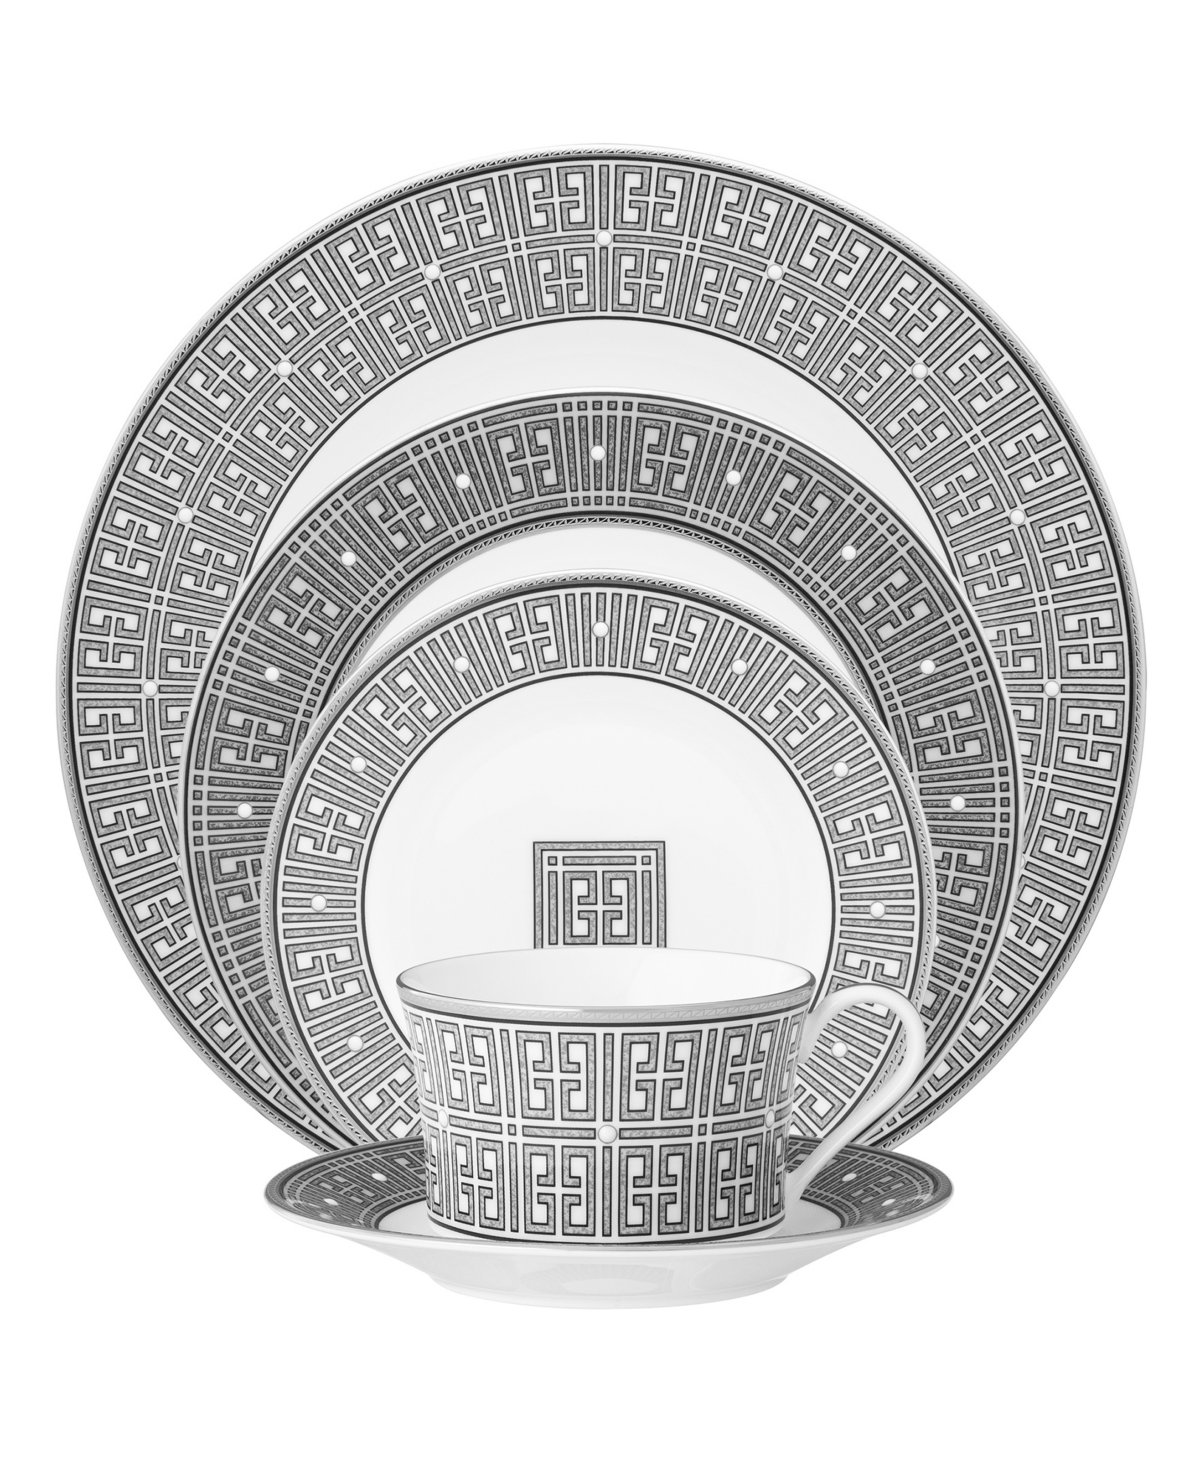 Noritake Infinity 5 Piece Place Setting In Graphite